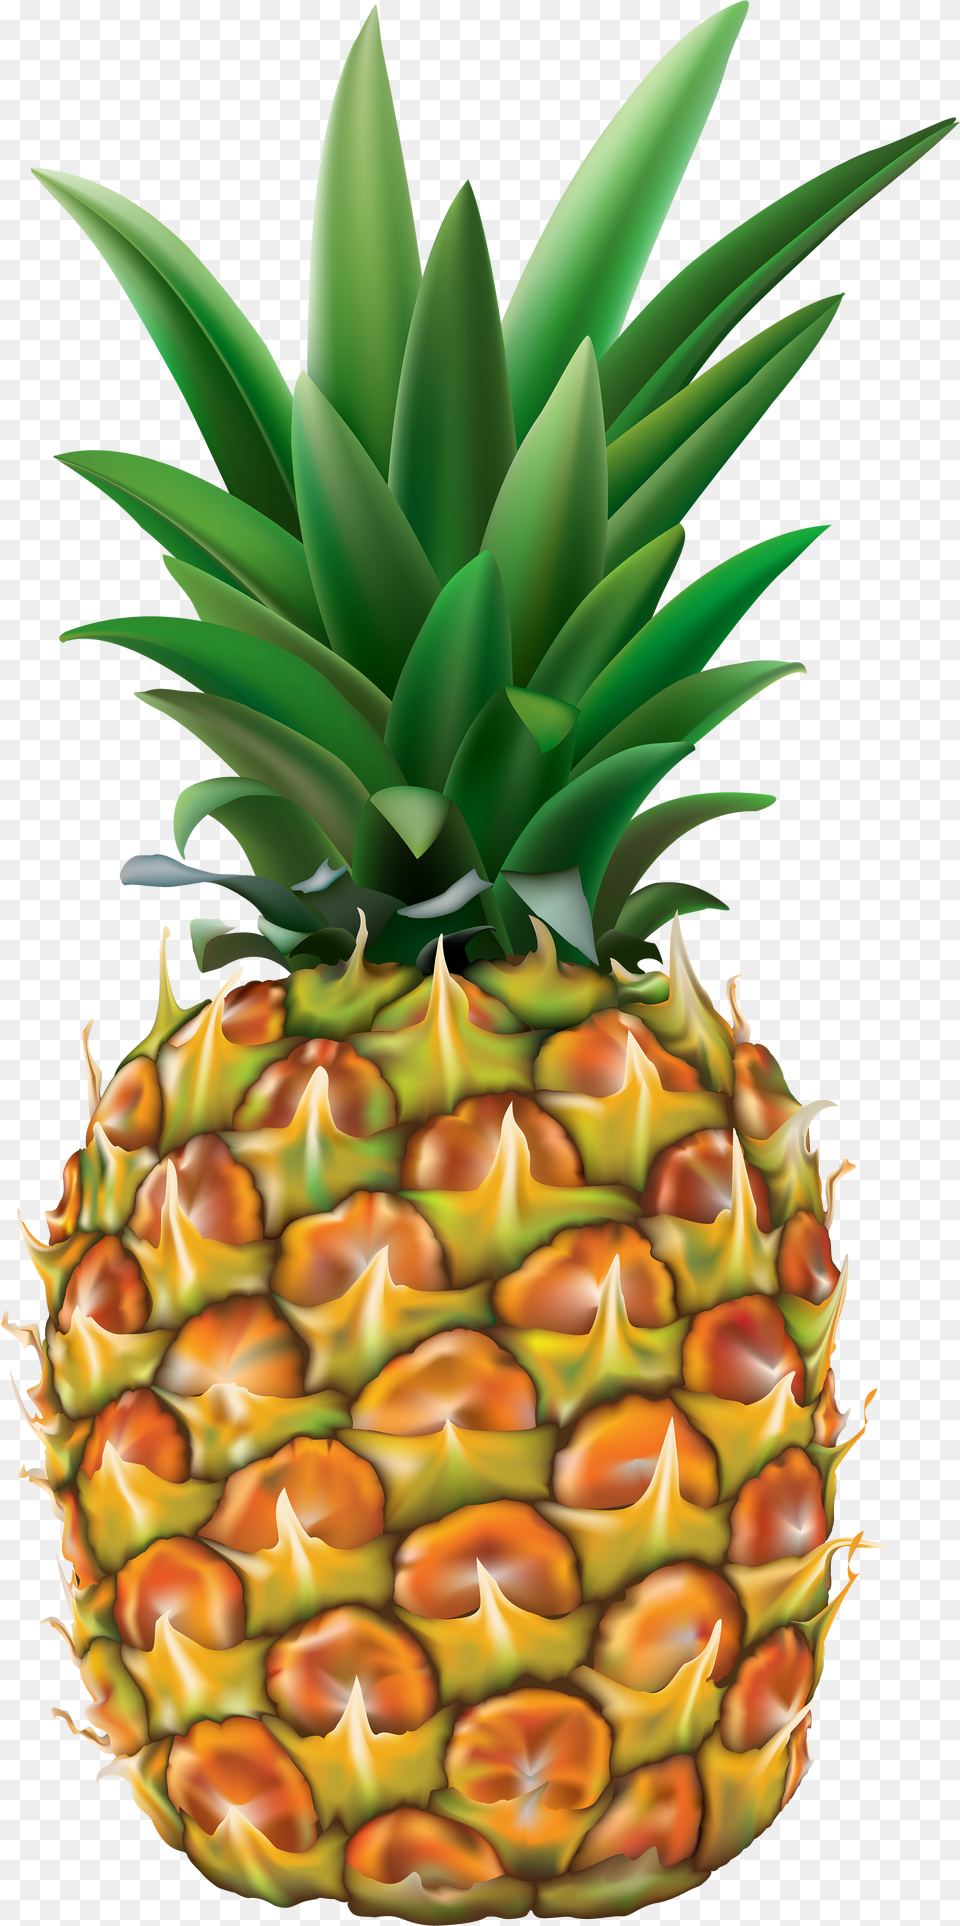 Clip Art Image Pineapple Clipart Free Transparent Png